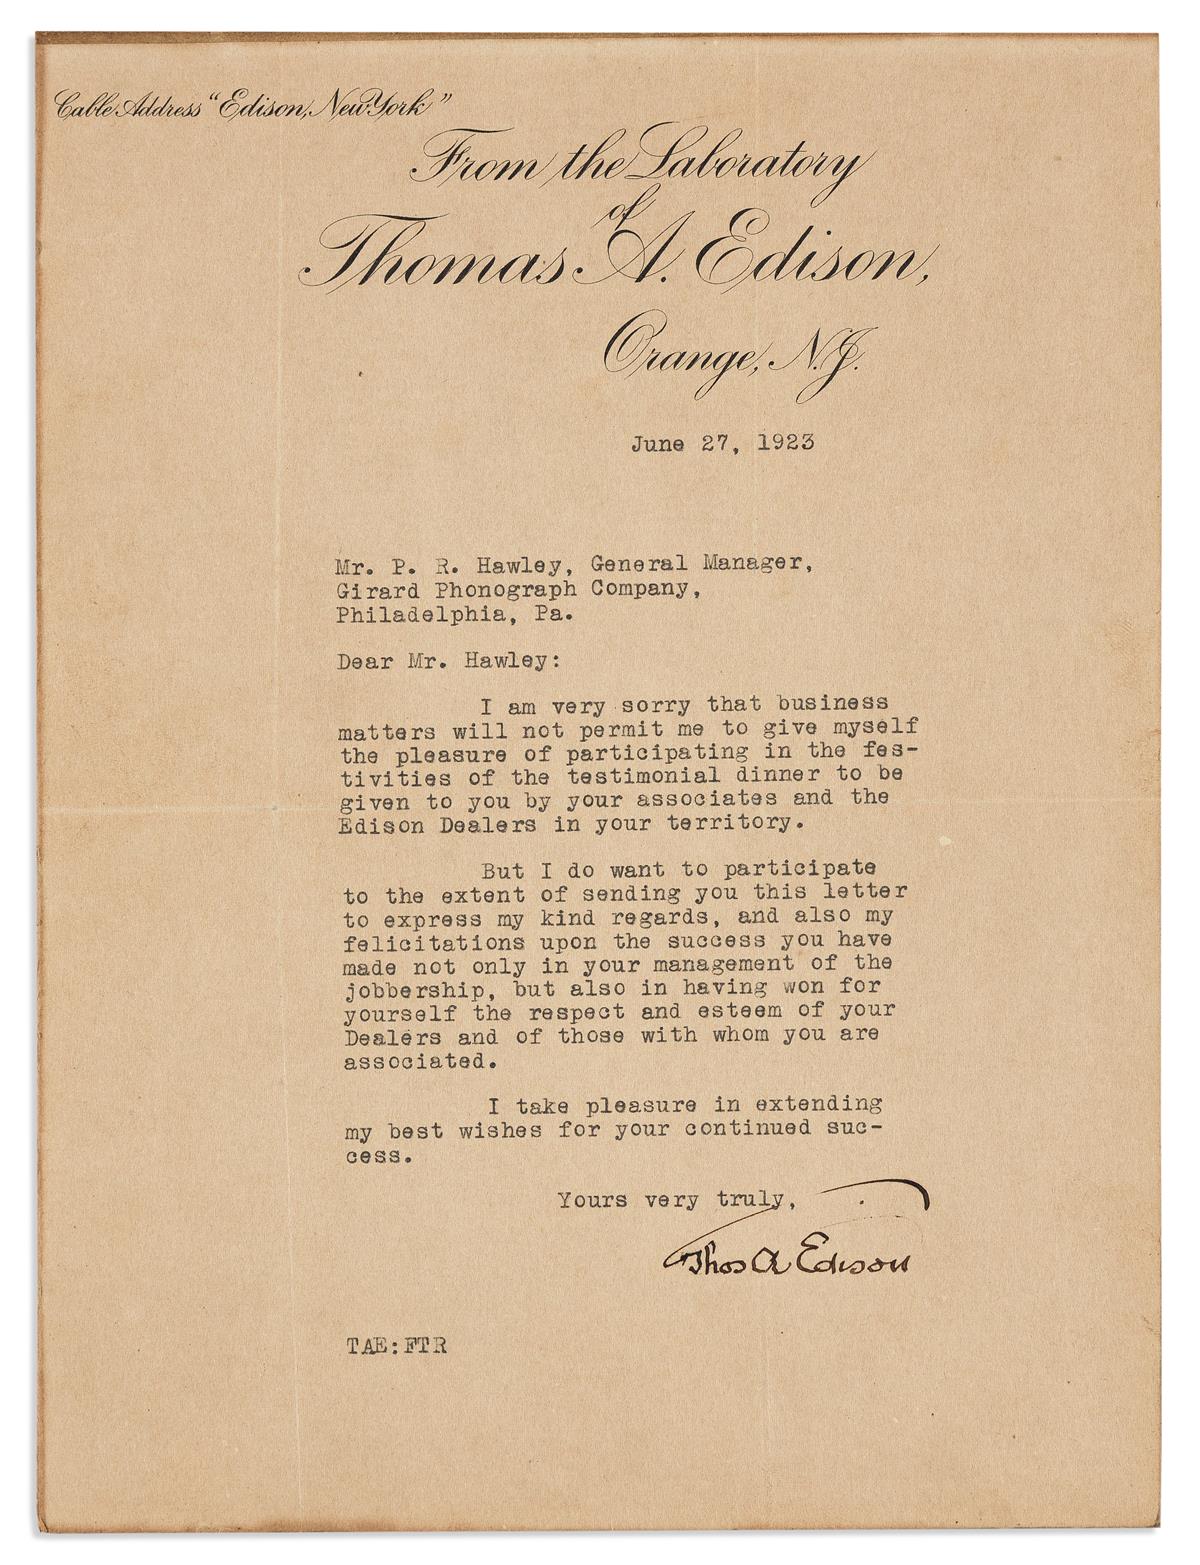 EDISON, THOMAS A. Typed Letter Signed, Thos A Edison, to General Manager of Girard Phonograph Peter R. Hawley,